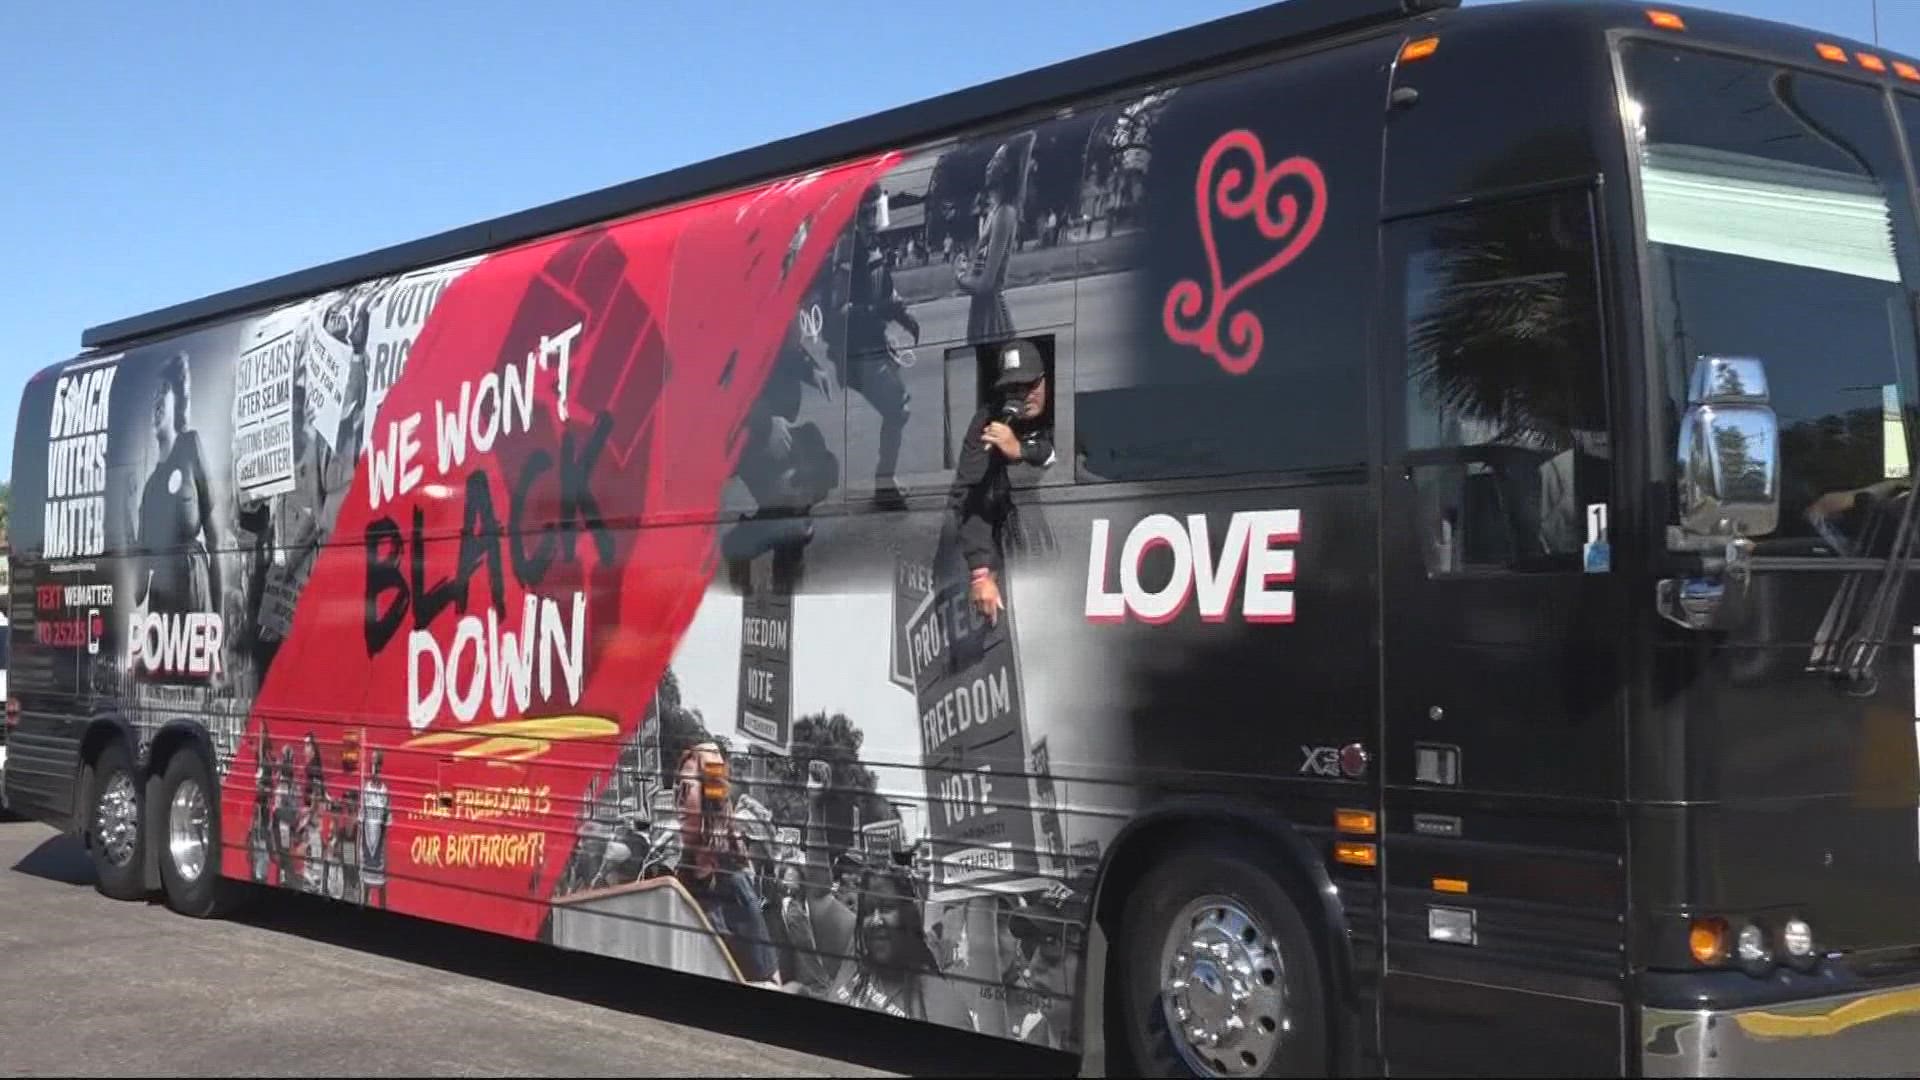 The "Blackest Bus in America" arrived in Jacksonville on Friday.